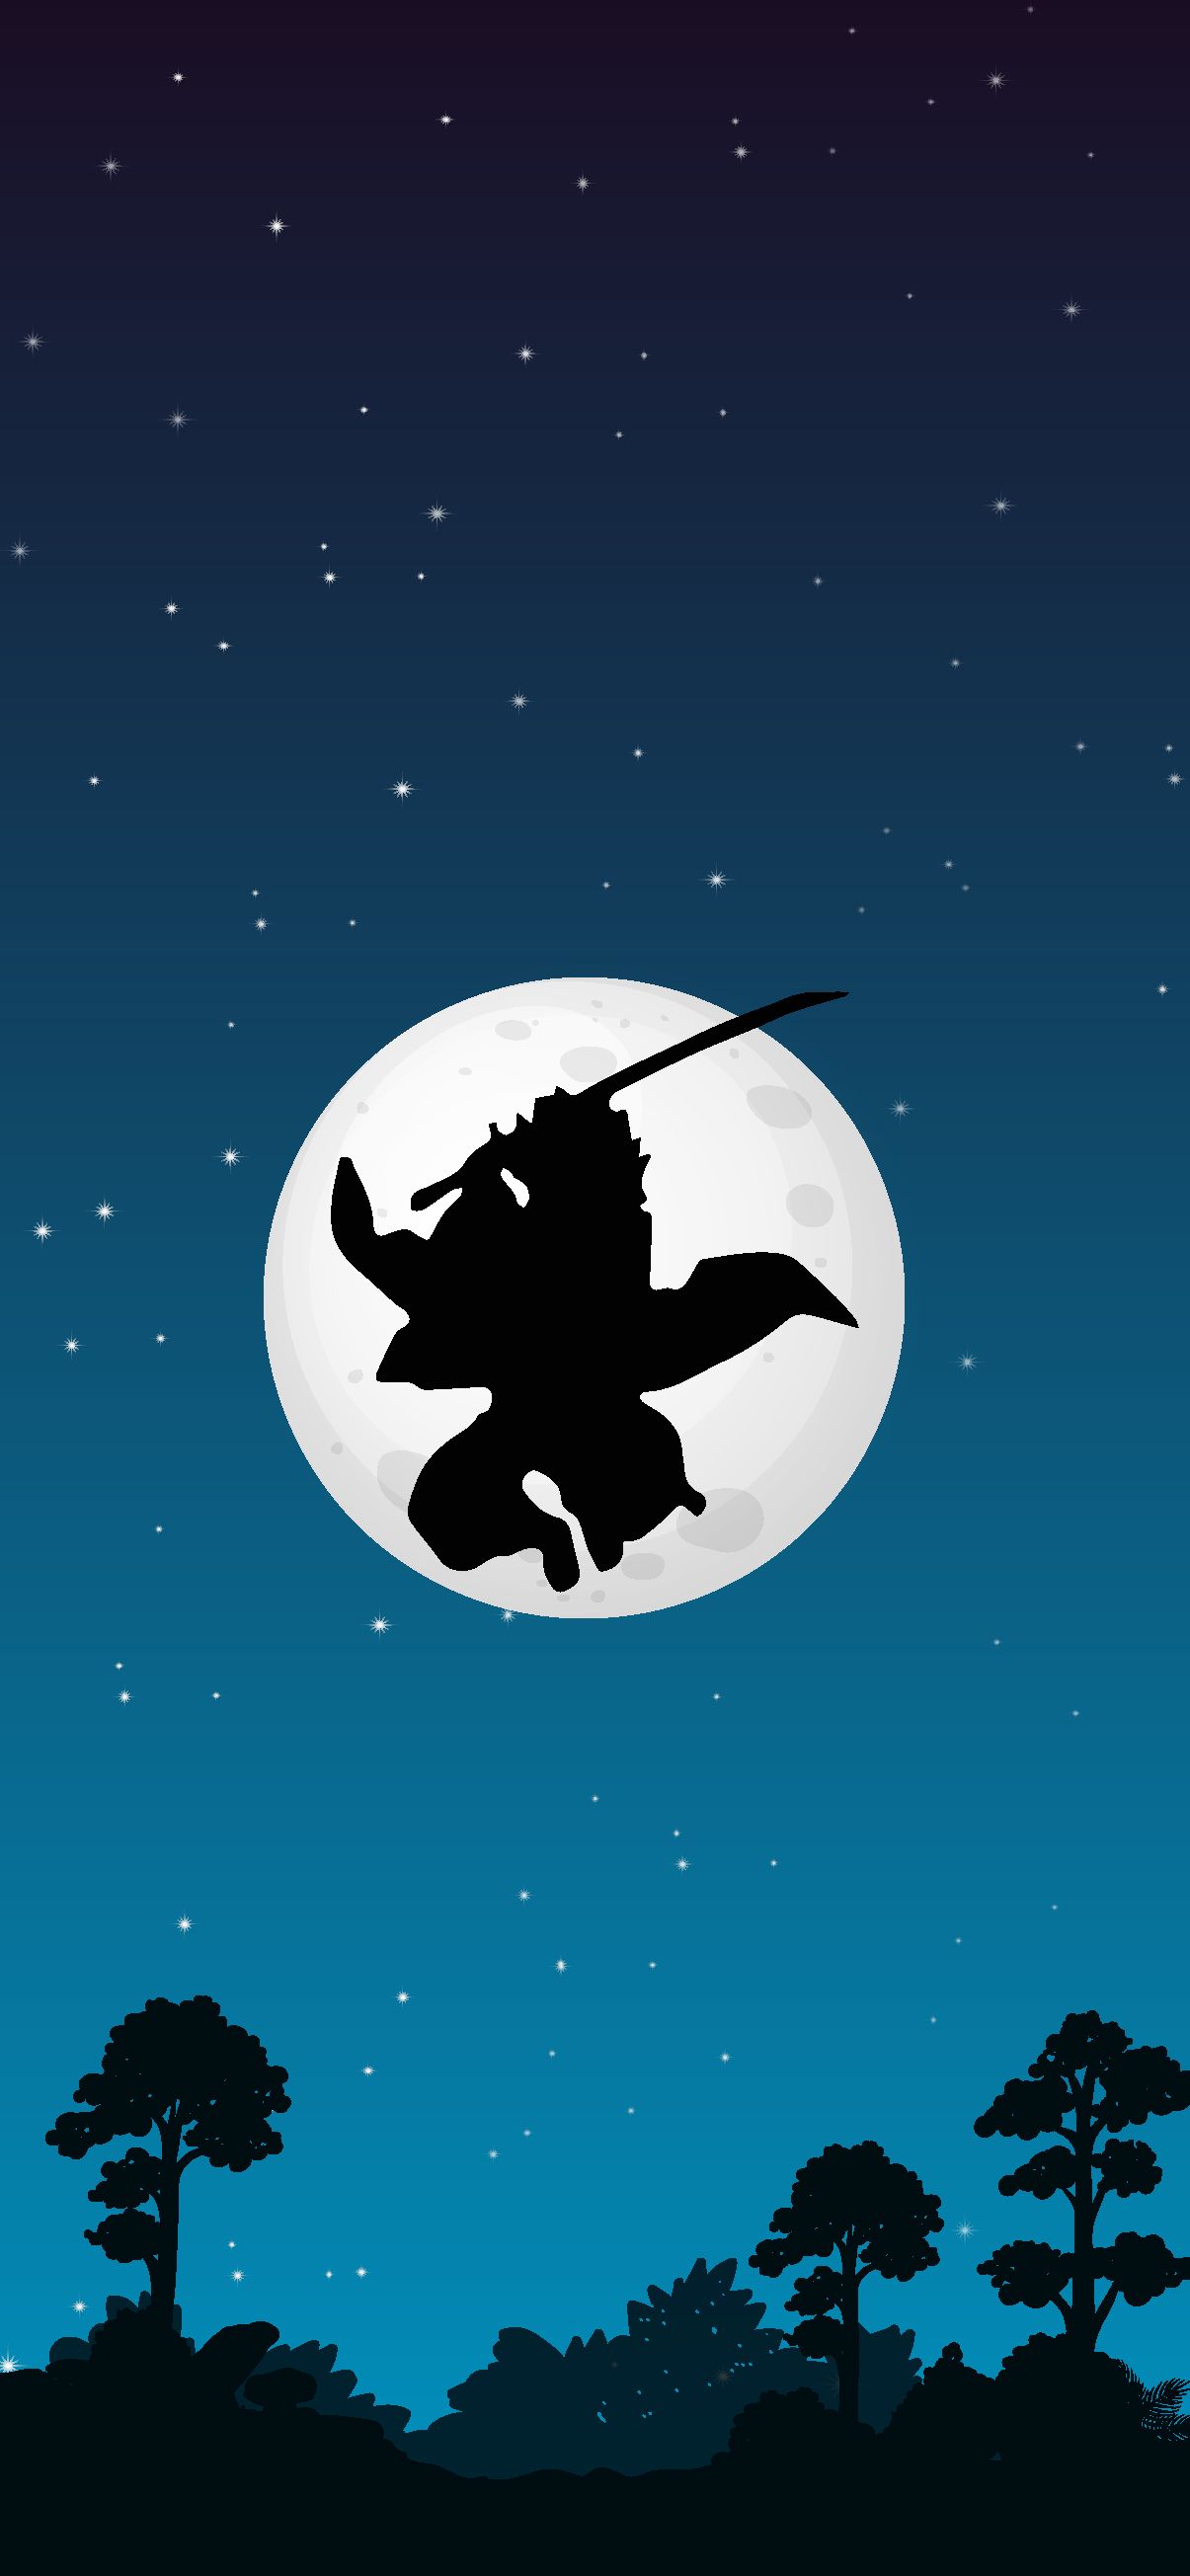 A silhouette of samurai with sword in the sky - Demon Slayer